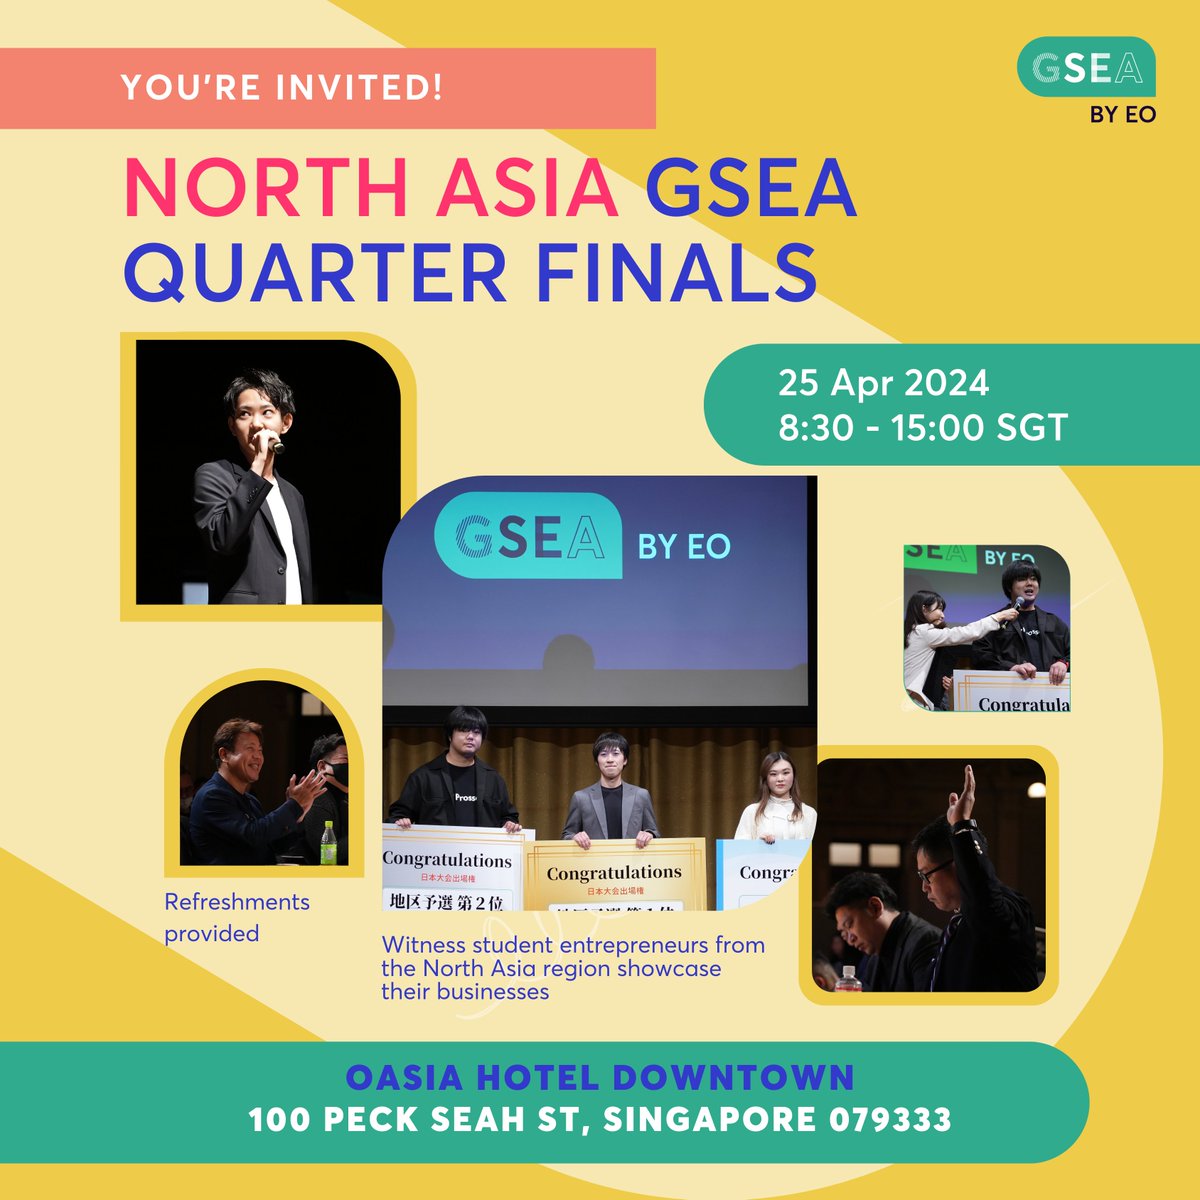 🌟 North Asia & APAC Global Quarter Finals kick off TOMORROW in Singapore! The best student entrepreneurs from these regions have journeyed to Singapore to showcase their innovative ventures and vie for a spot in the semi-finals! 🌍 Join us, if you're in Singapore! #EO #GSEA